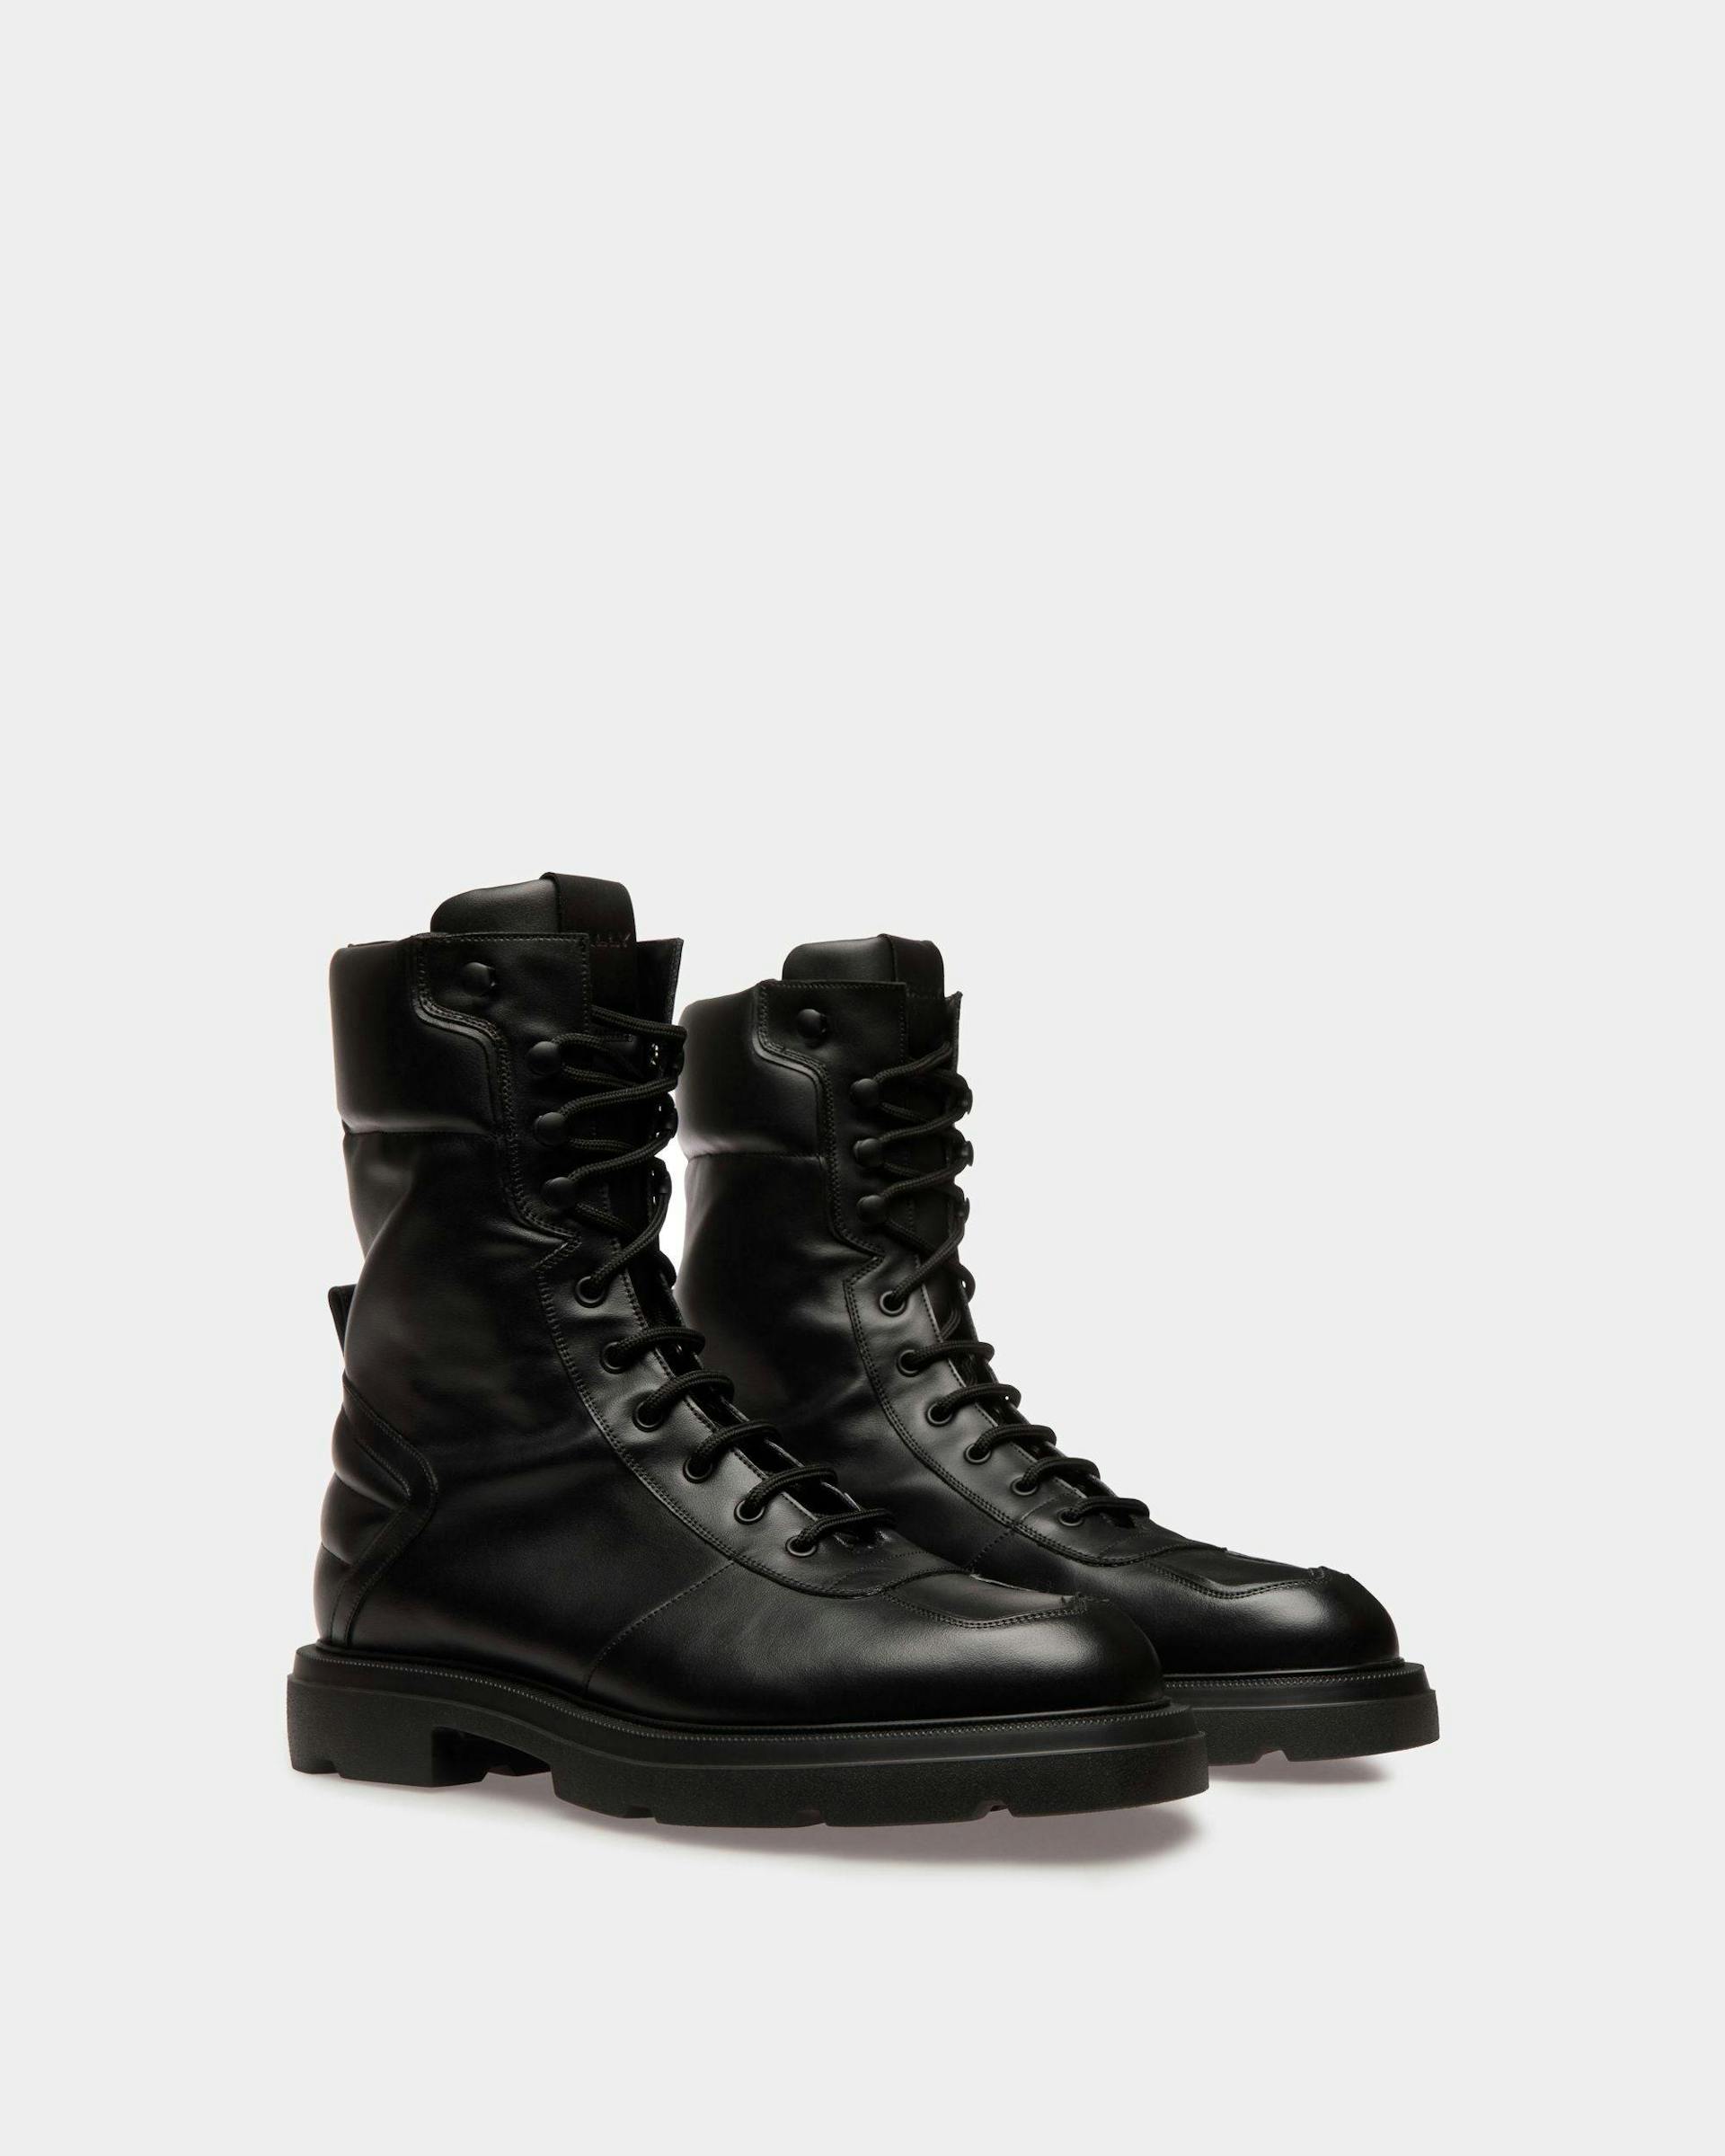 Enga Boots In Black Leather - Men's - Bally - 03